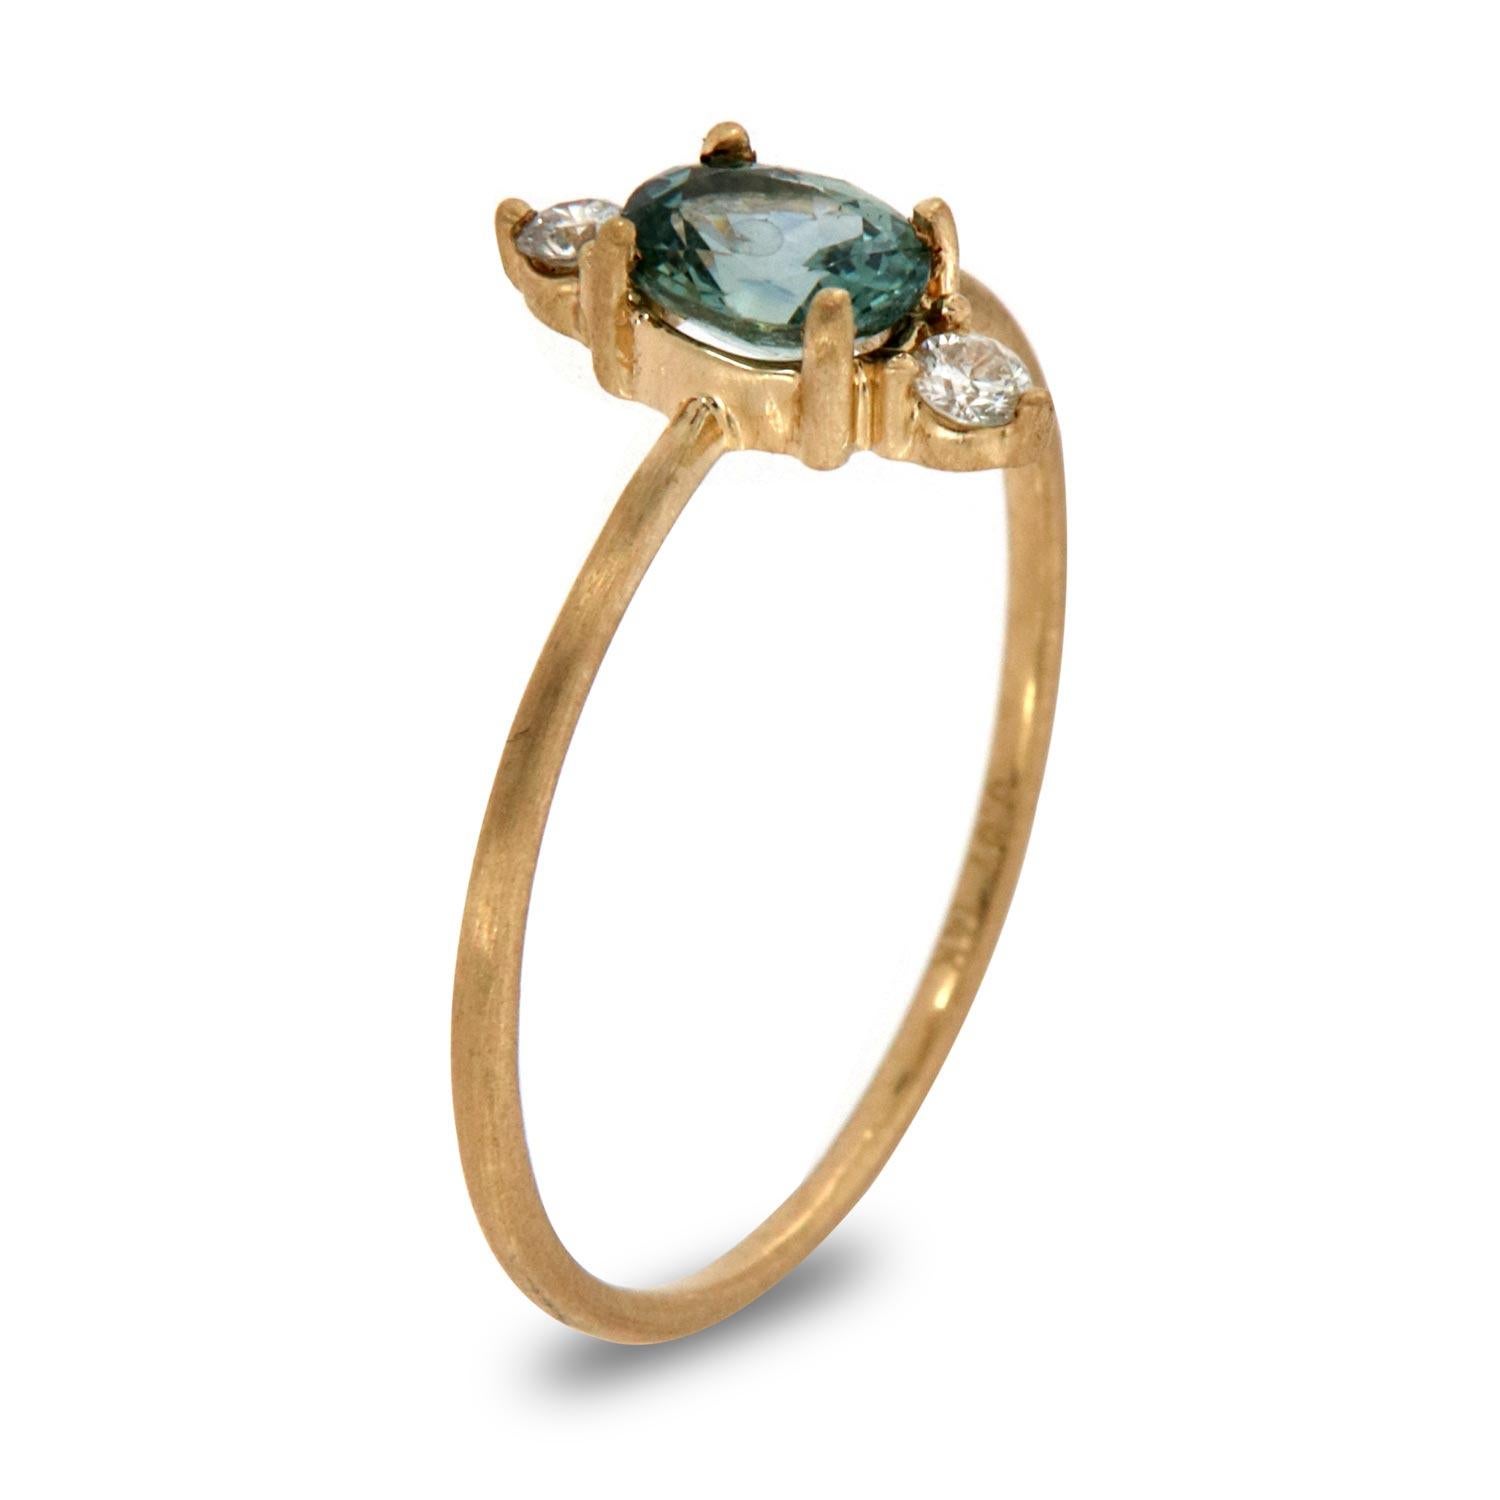 This petite Rustic ring is impressive in its vintage appeal, featuring a natural Teal color oval sapphire, accented with round brilliant diamonds. Experience the difference in person!

Product details: 

Center Gemstone Type: SAPPHIRE
Center